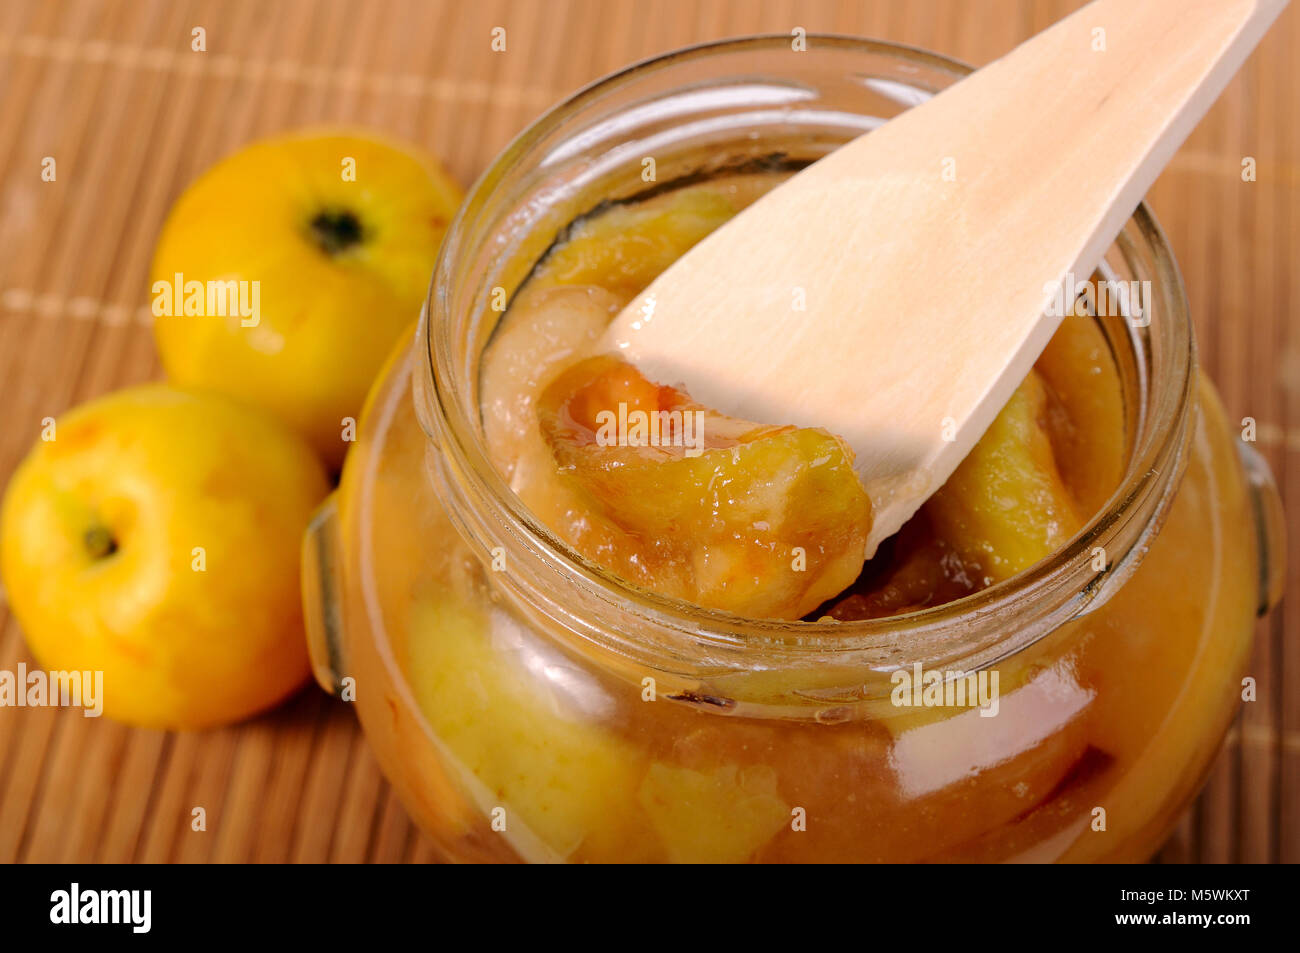 Wooden spoon in the jar of apple jam closeup Stock Photo